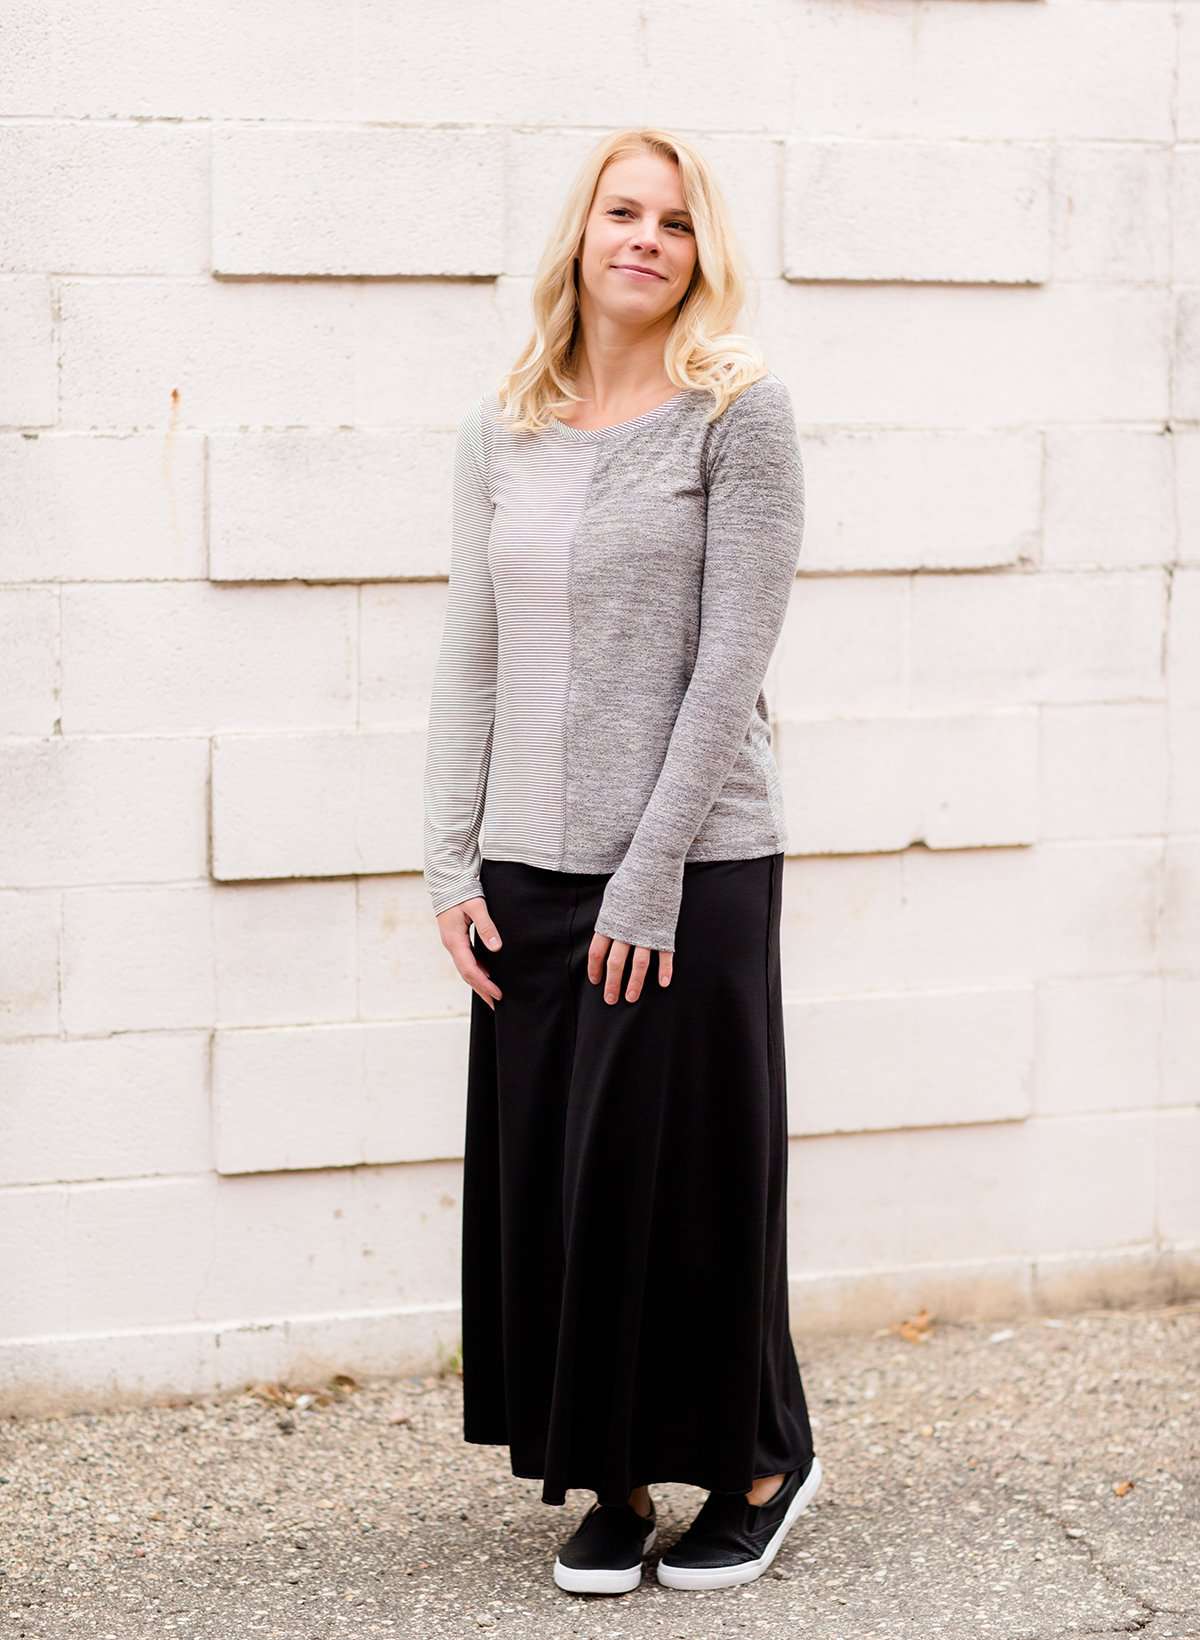 Modest women's gray and charcoal patterned sweater